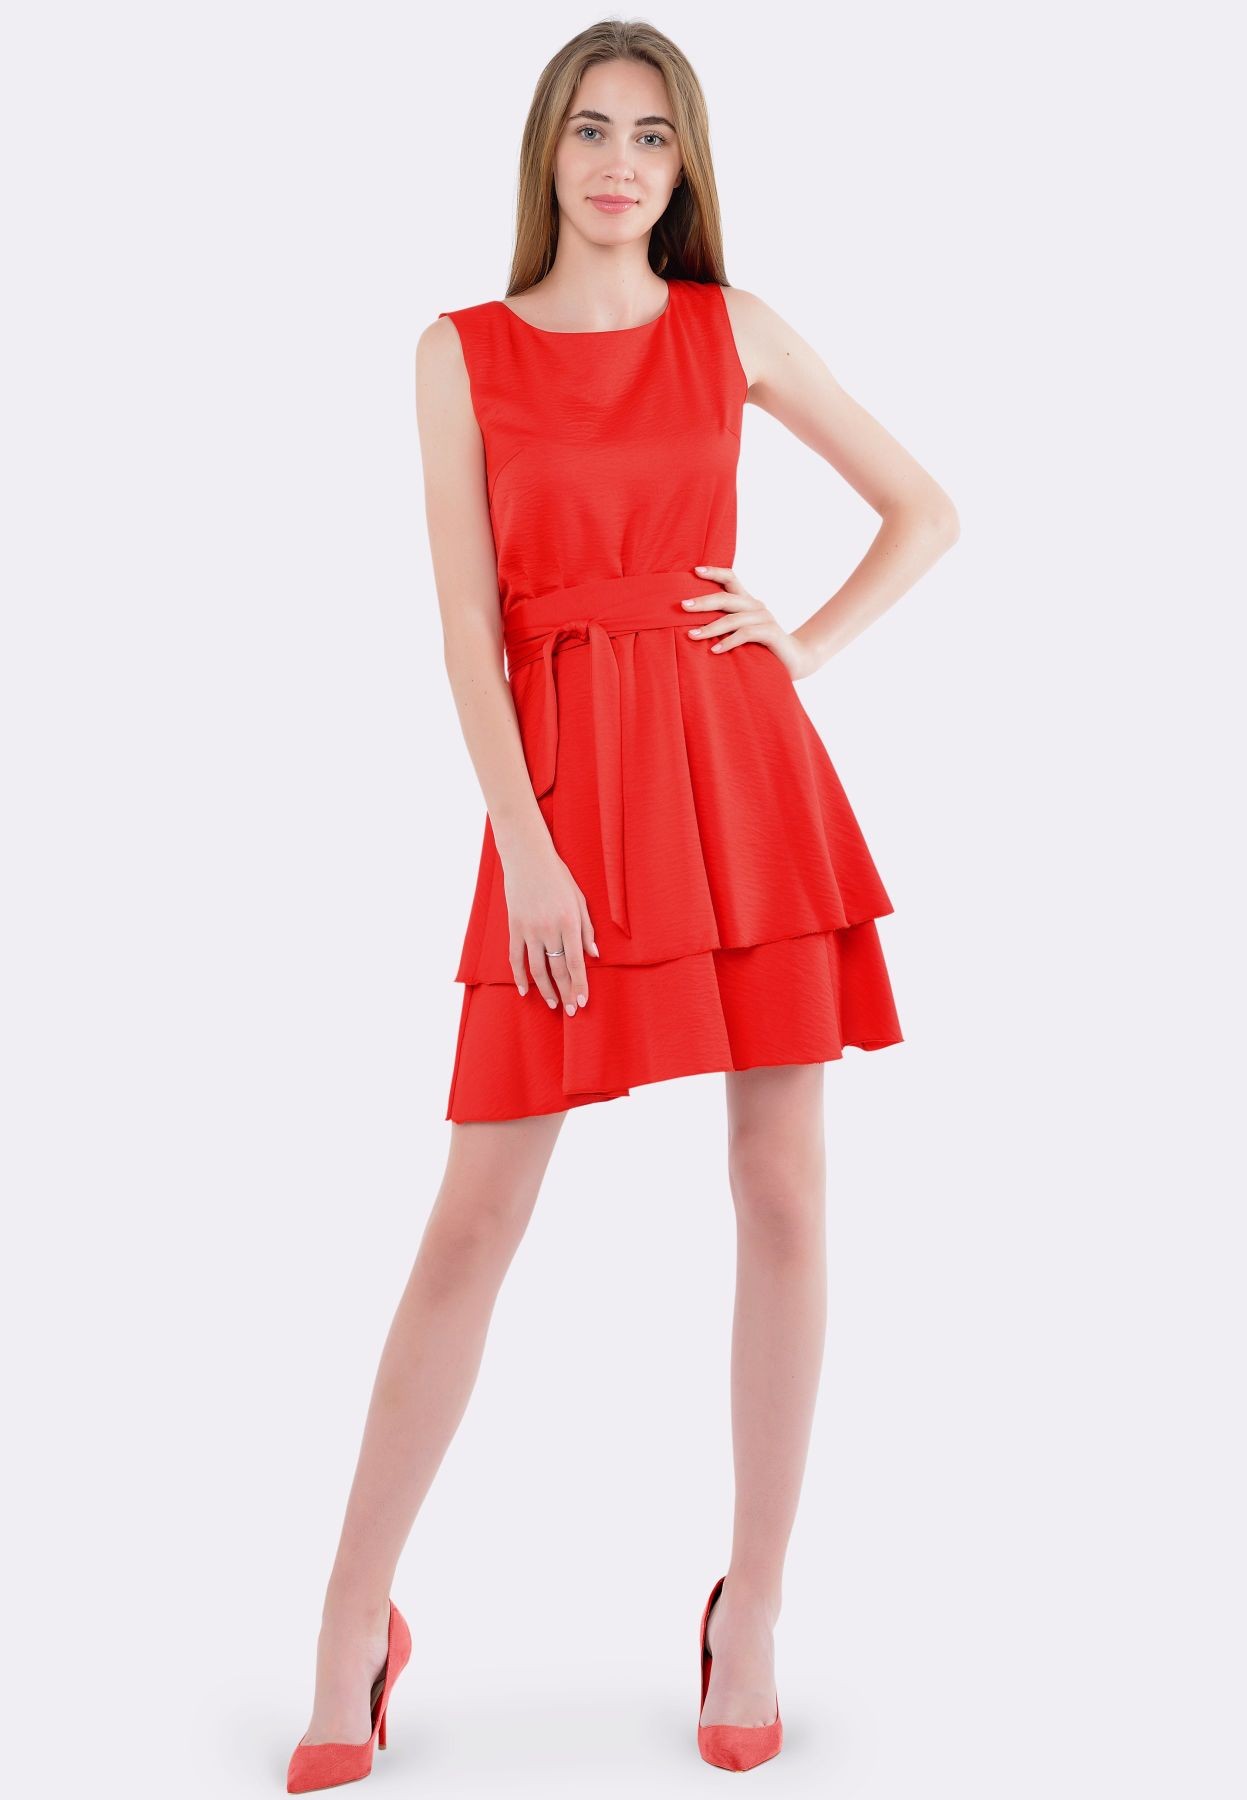 Red dress with double-tiered skirt 5587k